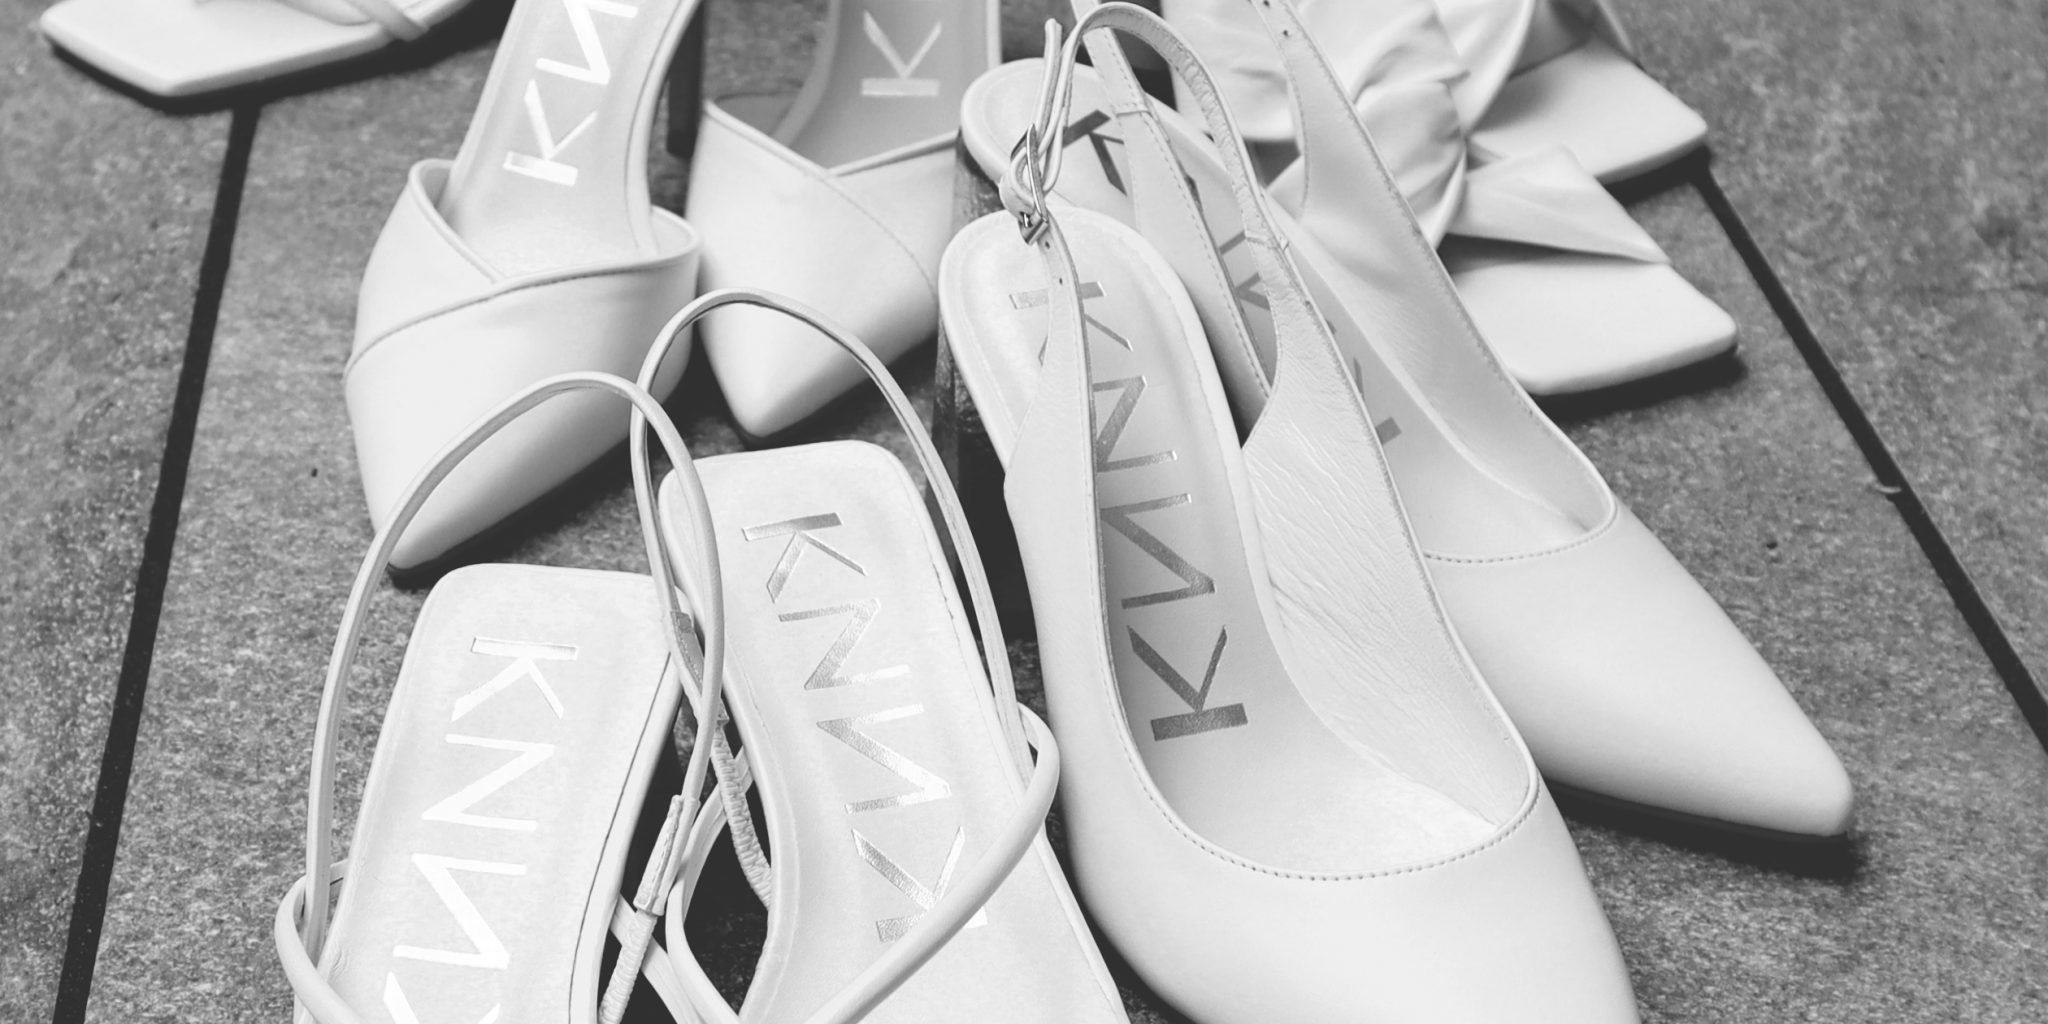 bridal shoes, pointy,  special heel, wedding shoes, leather, white, stiletto heel, stiletto,  pumps, block heel,  sandal, sandals, sustainable, customizable, premium shoes, collection